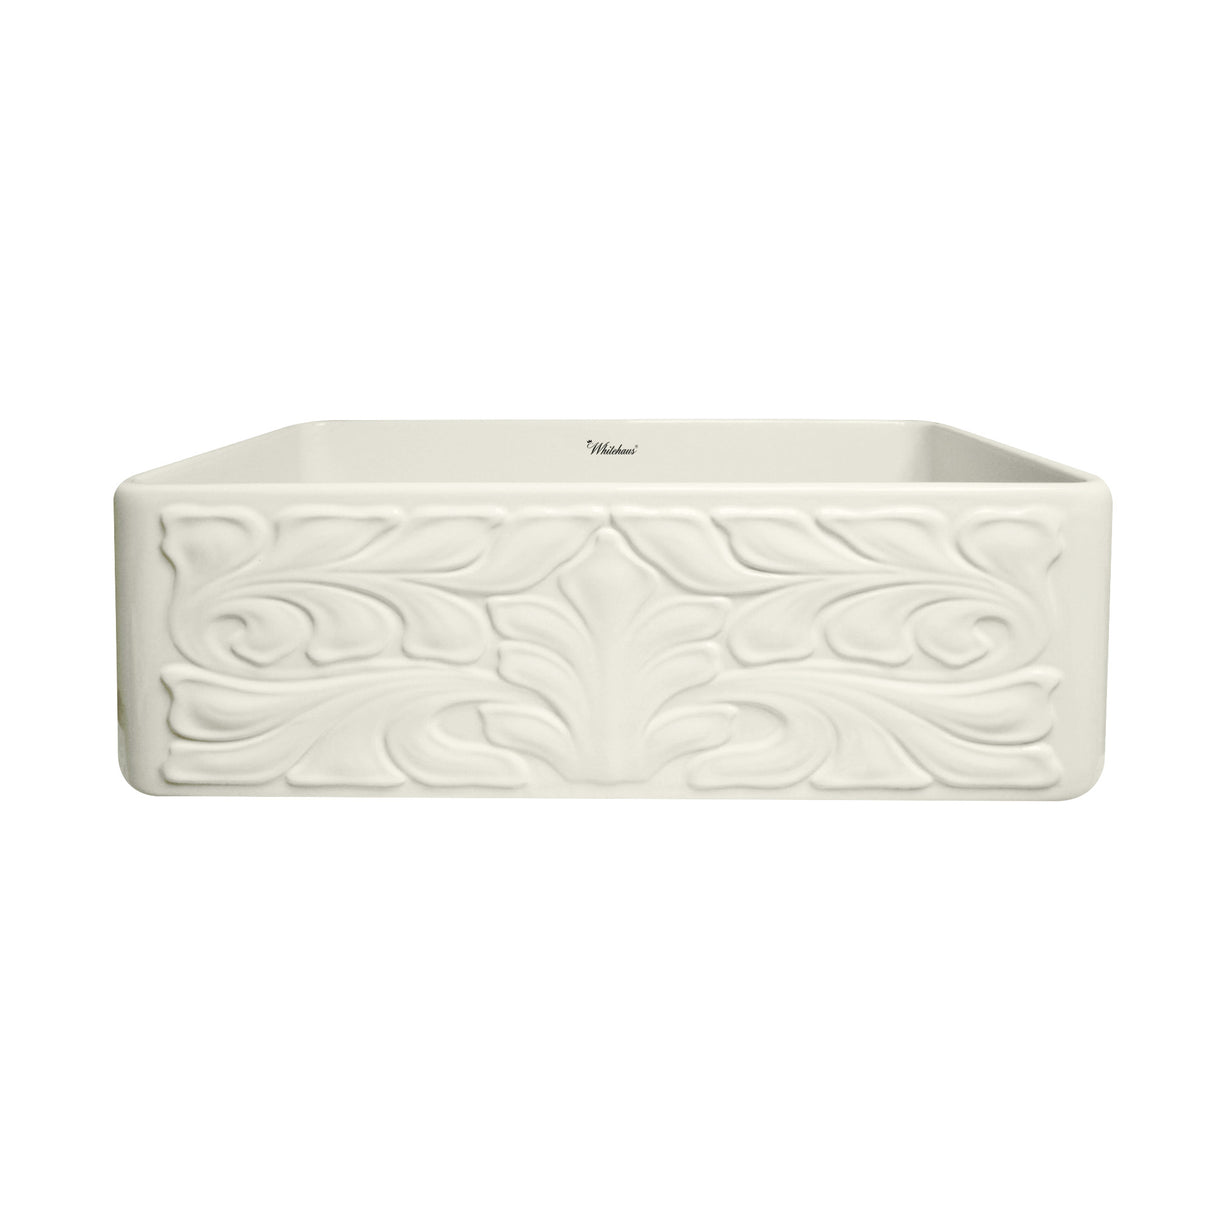 Farmhaus Fireclay Reversible Sink with a Gothichaus Swirl Design Front Apron on One Side, and a Fluted Front Apron on the Opposite Side.